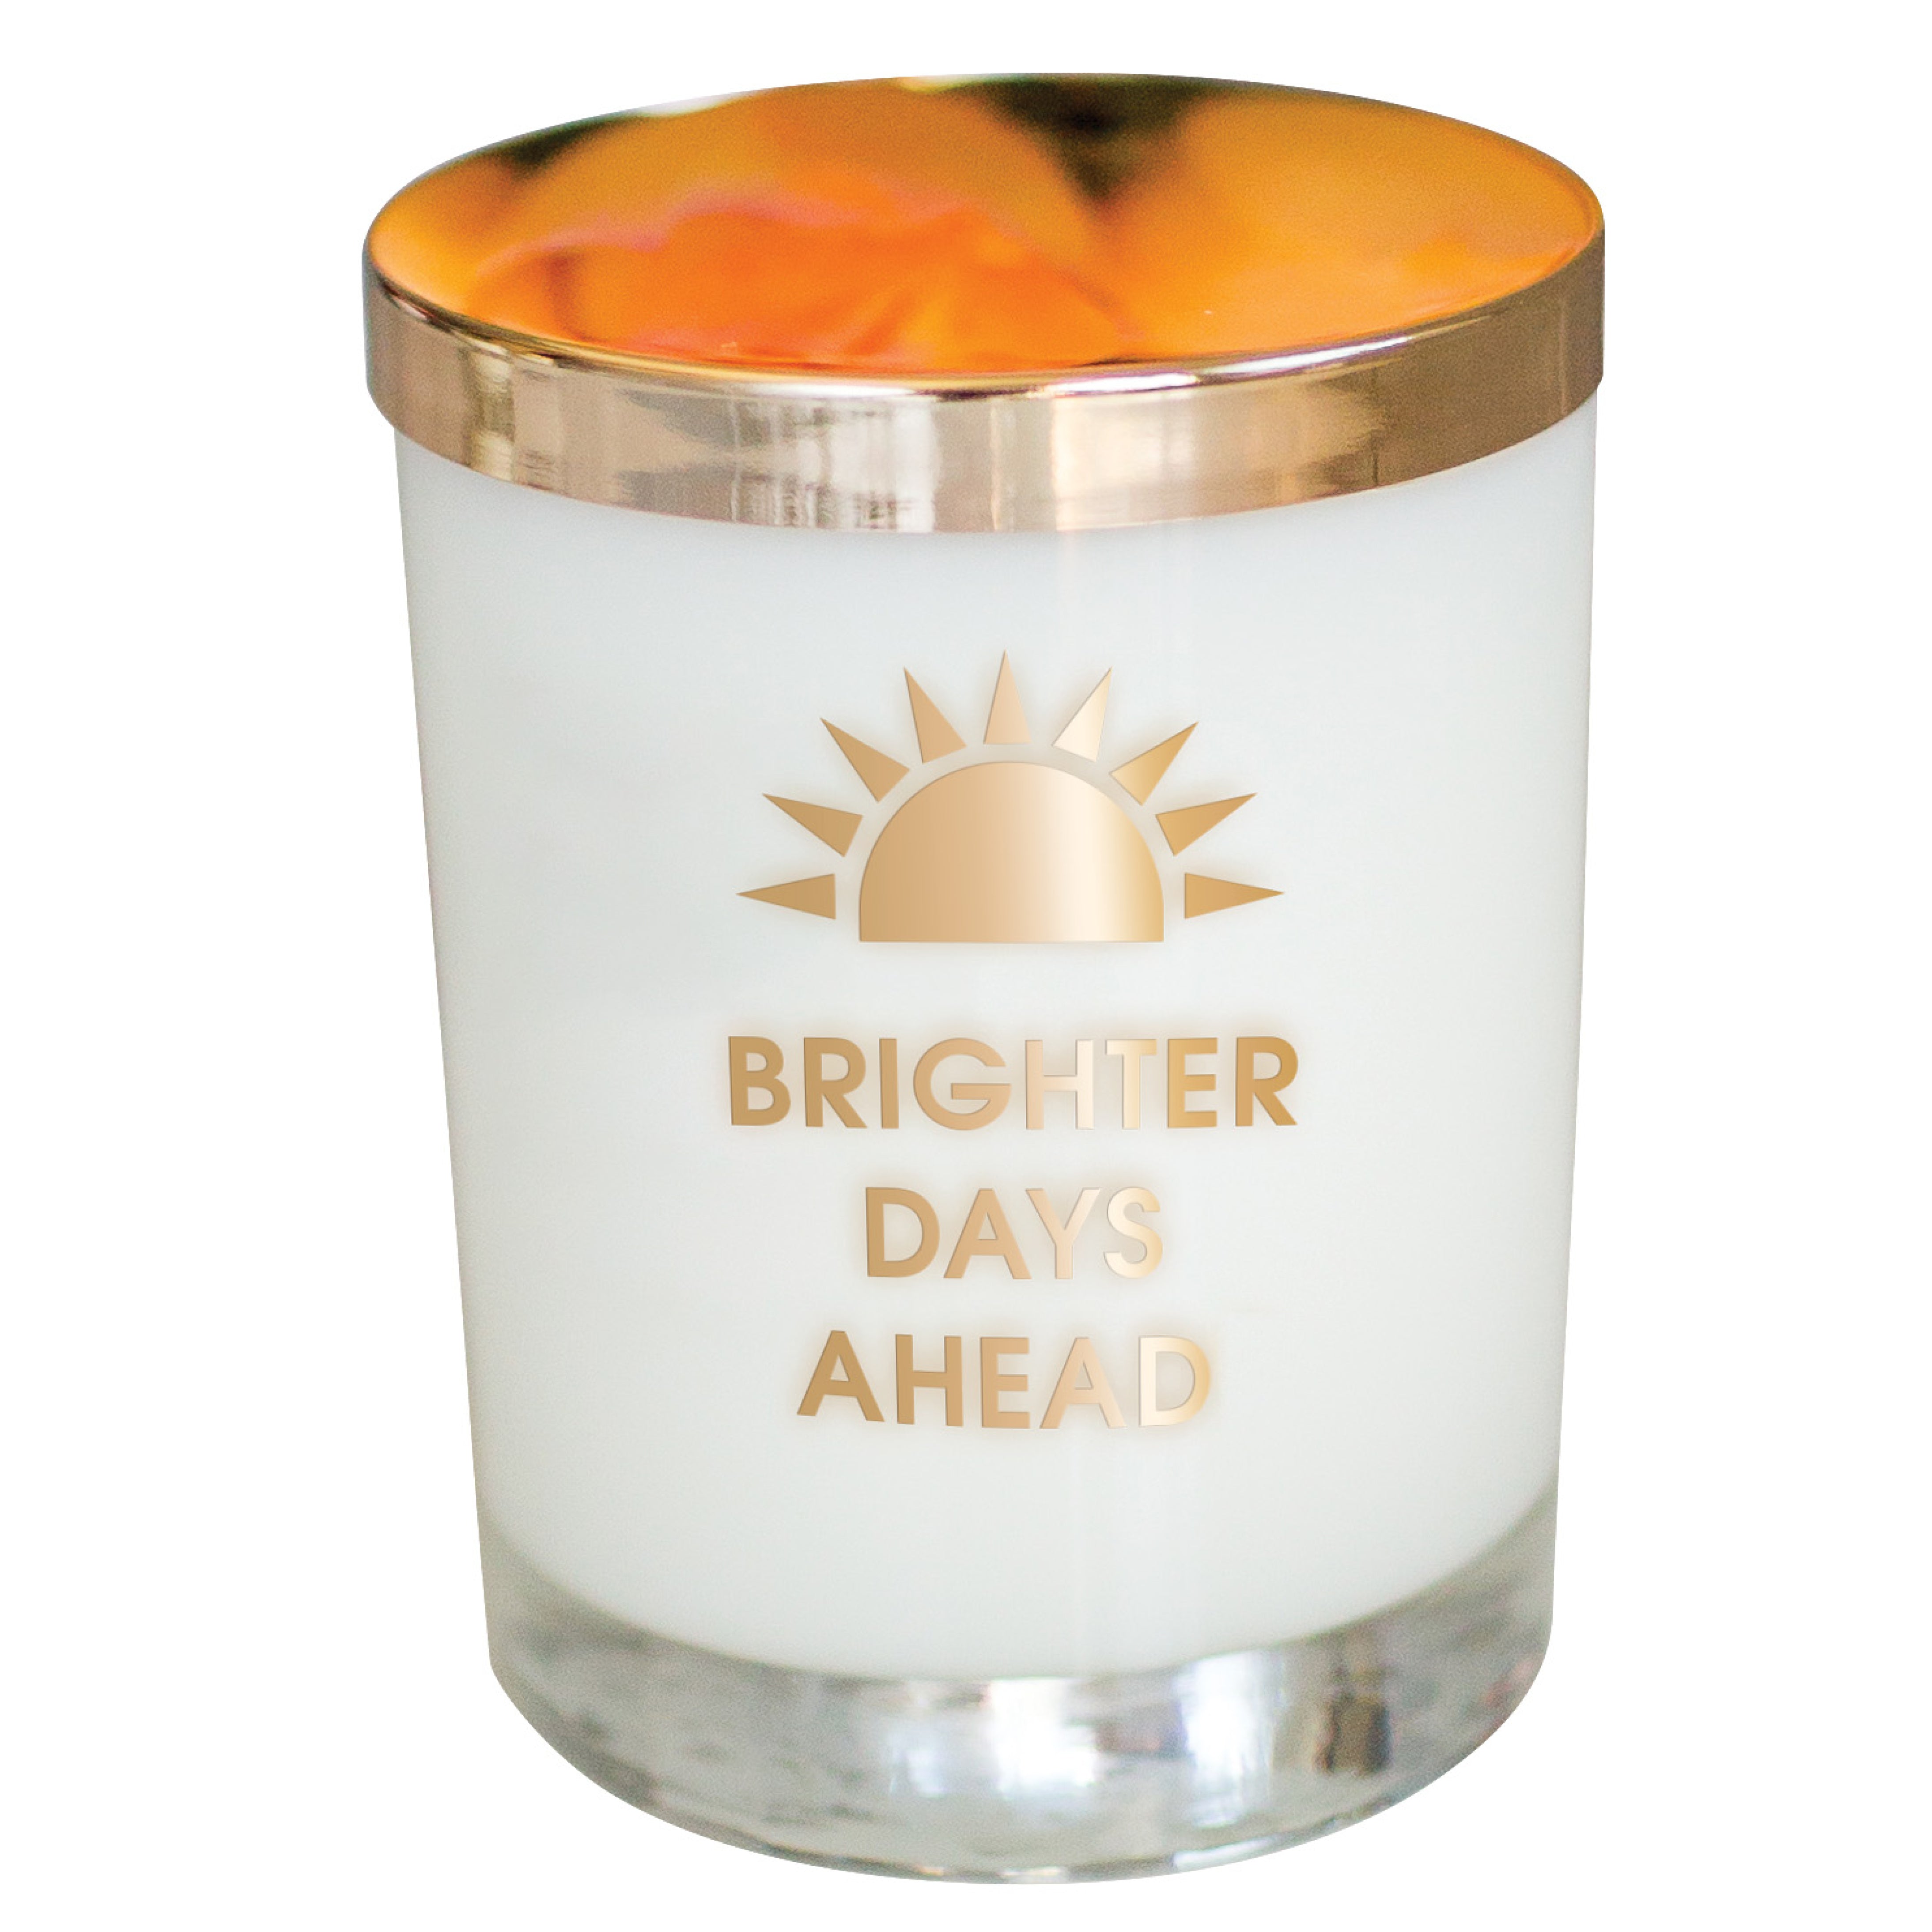 Brighter Days Ahead - Candle on the Rocks